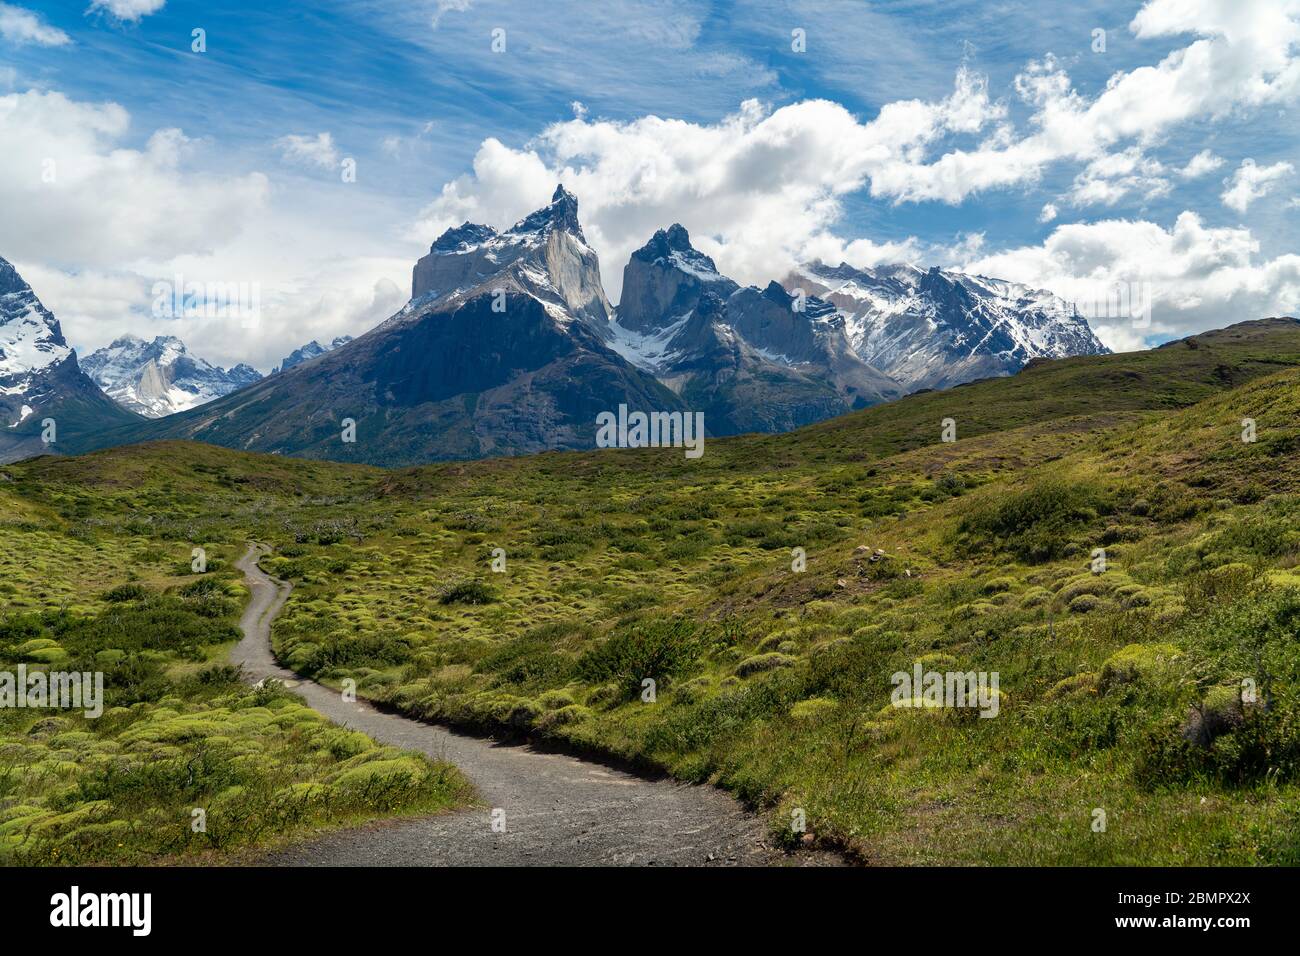 Paine Horns Massif (Spanish: Cuernos del Paine ) in Torres del Paine National Park, Patagonia, Chile, South America. Stock Photo